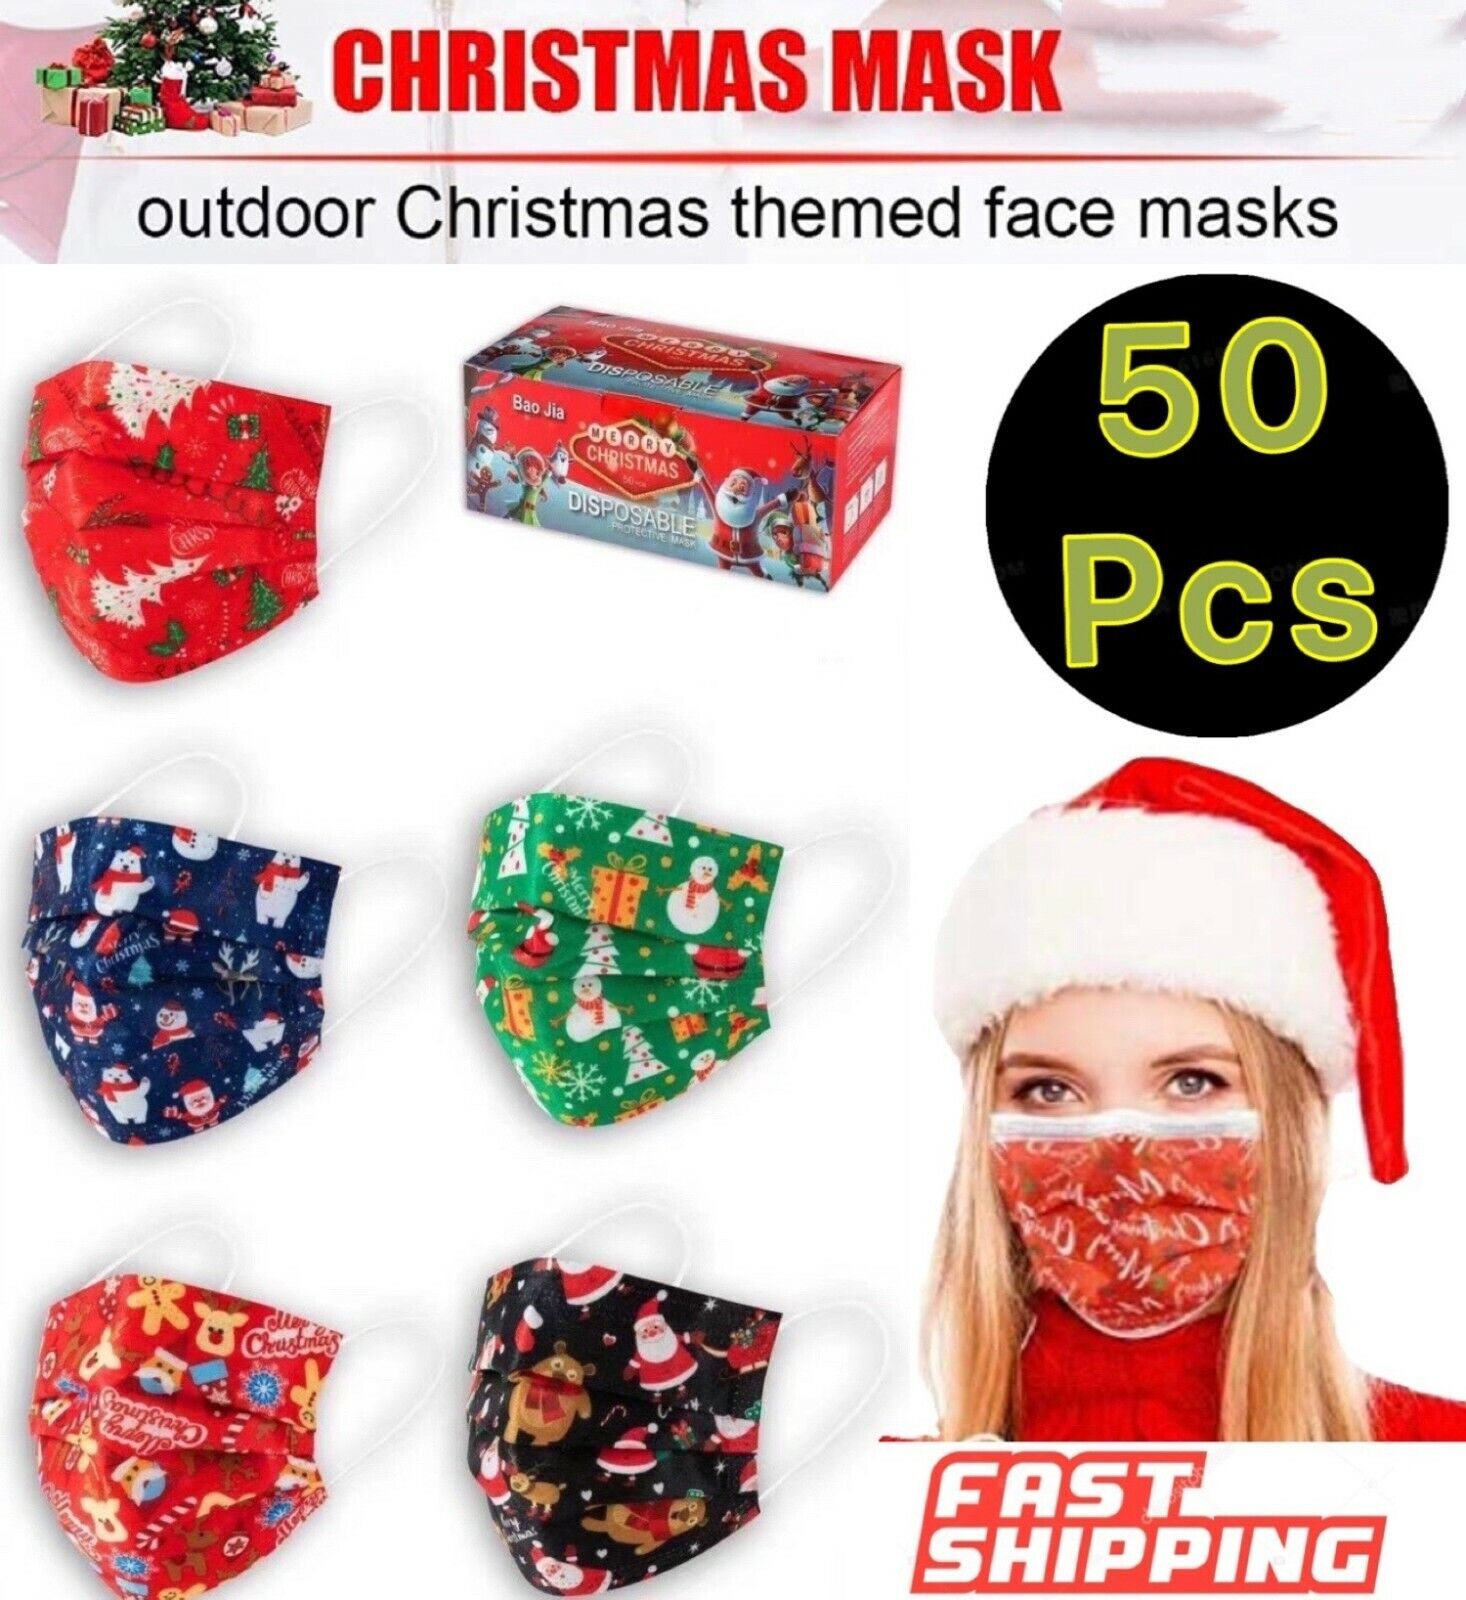 50 PCS Christmas Face Mask Mouth & Nose Protector Respirator Masks US Seller Unbranded Does Not Apply